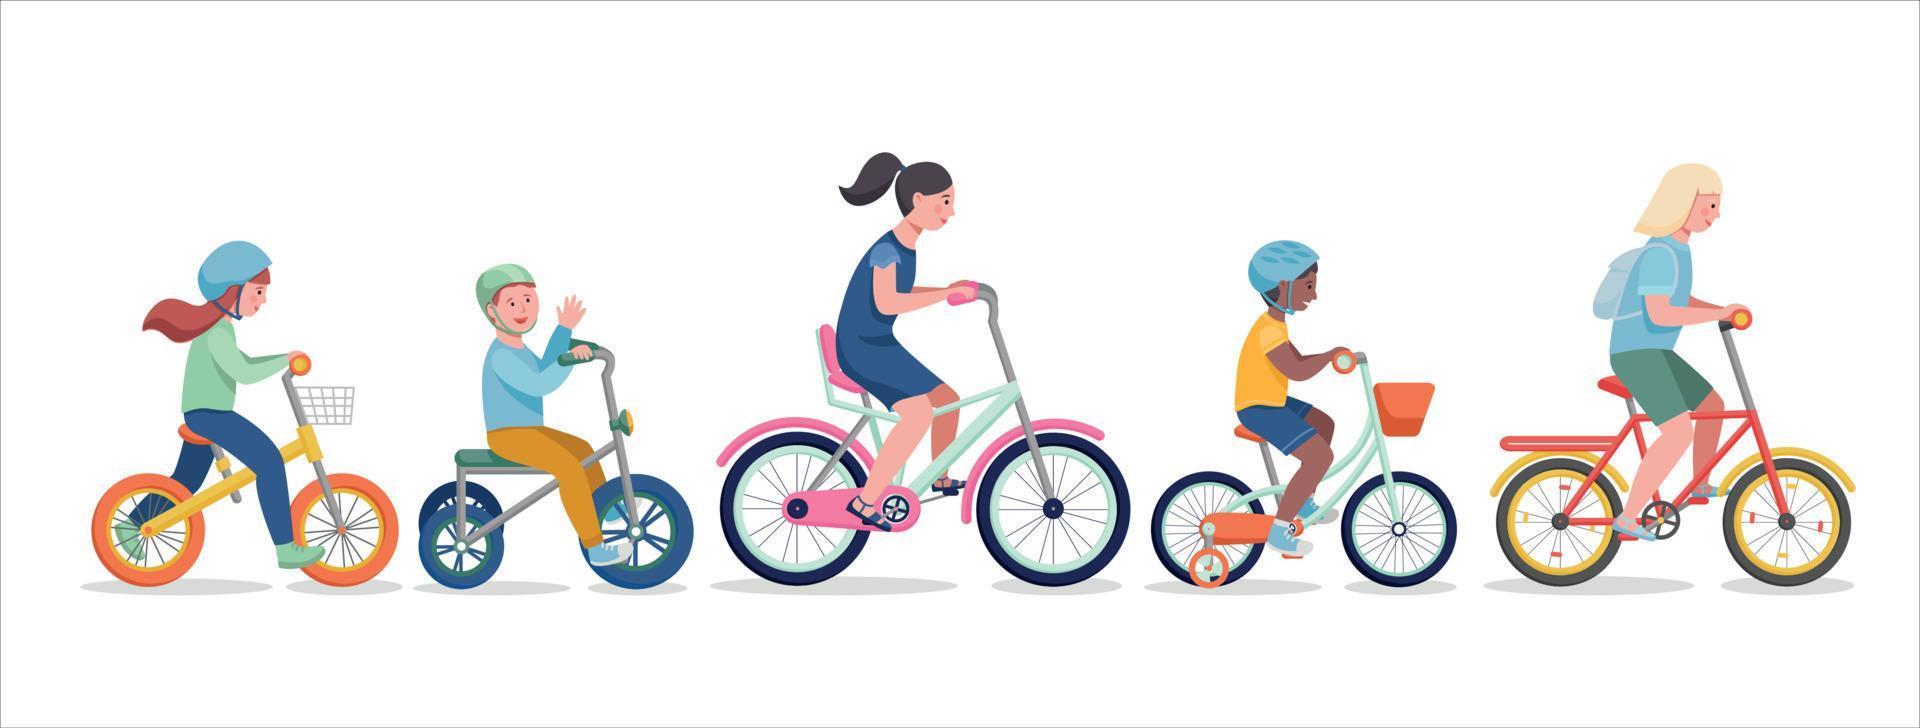 Kids riding bikes. Illustration of a group of kids biking on bicycles vector